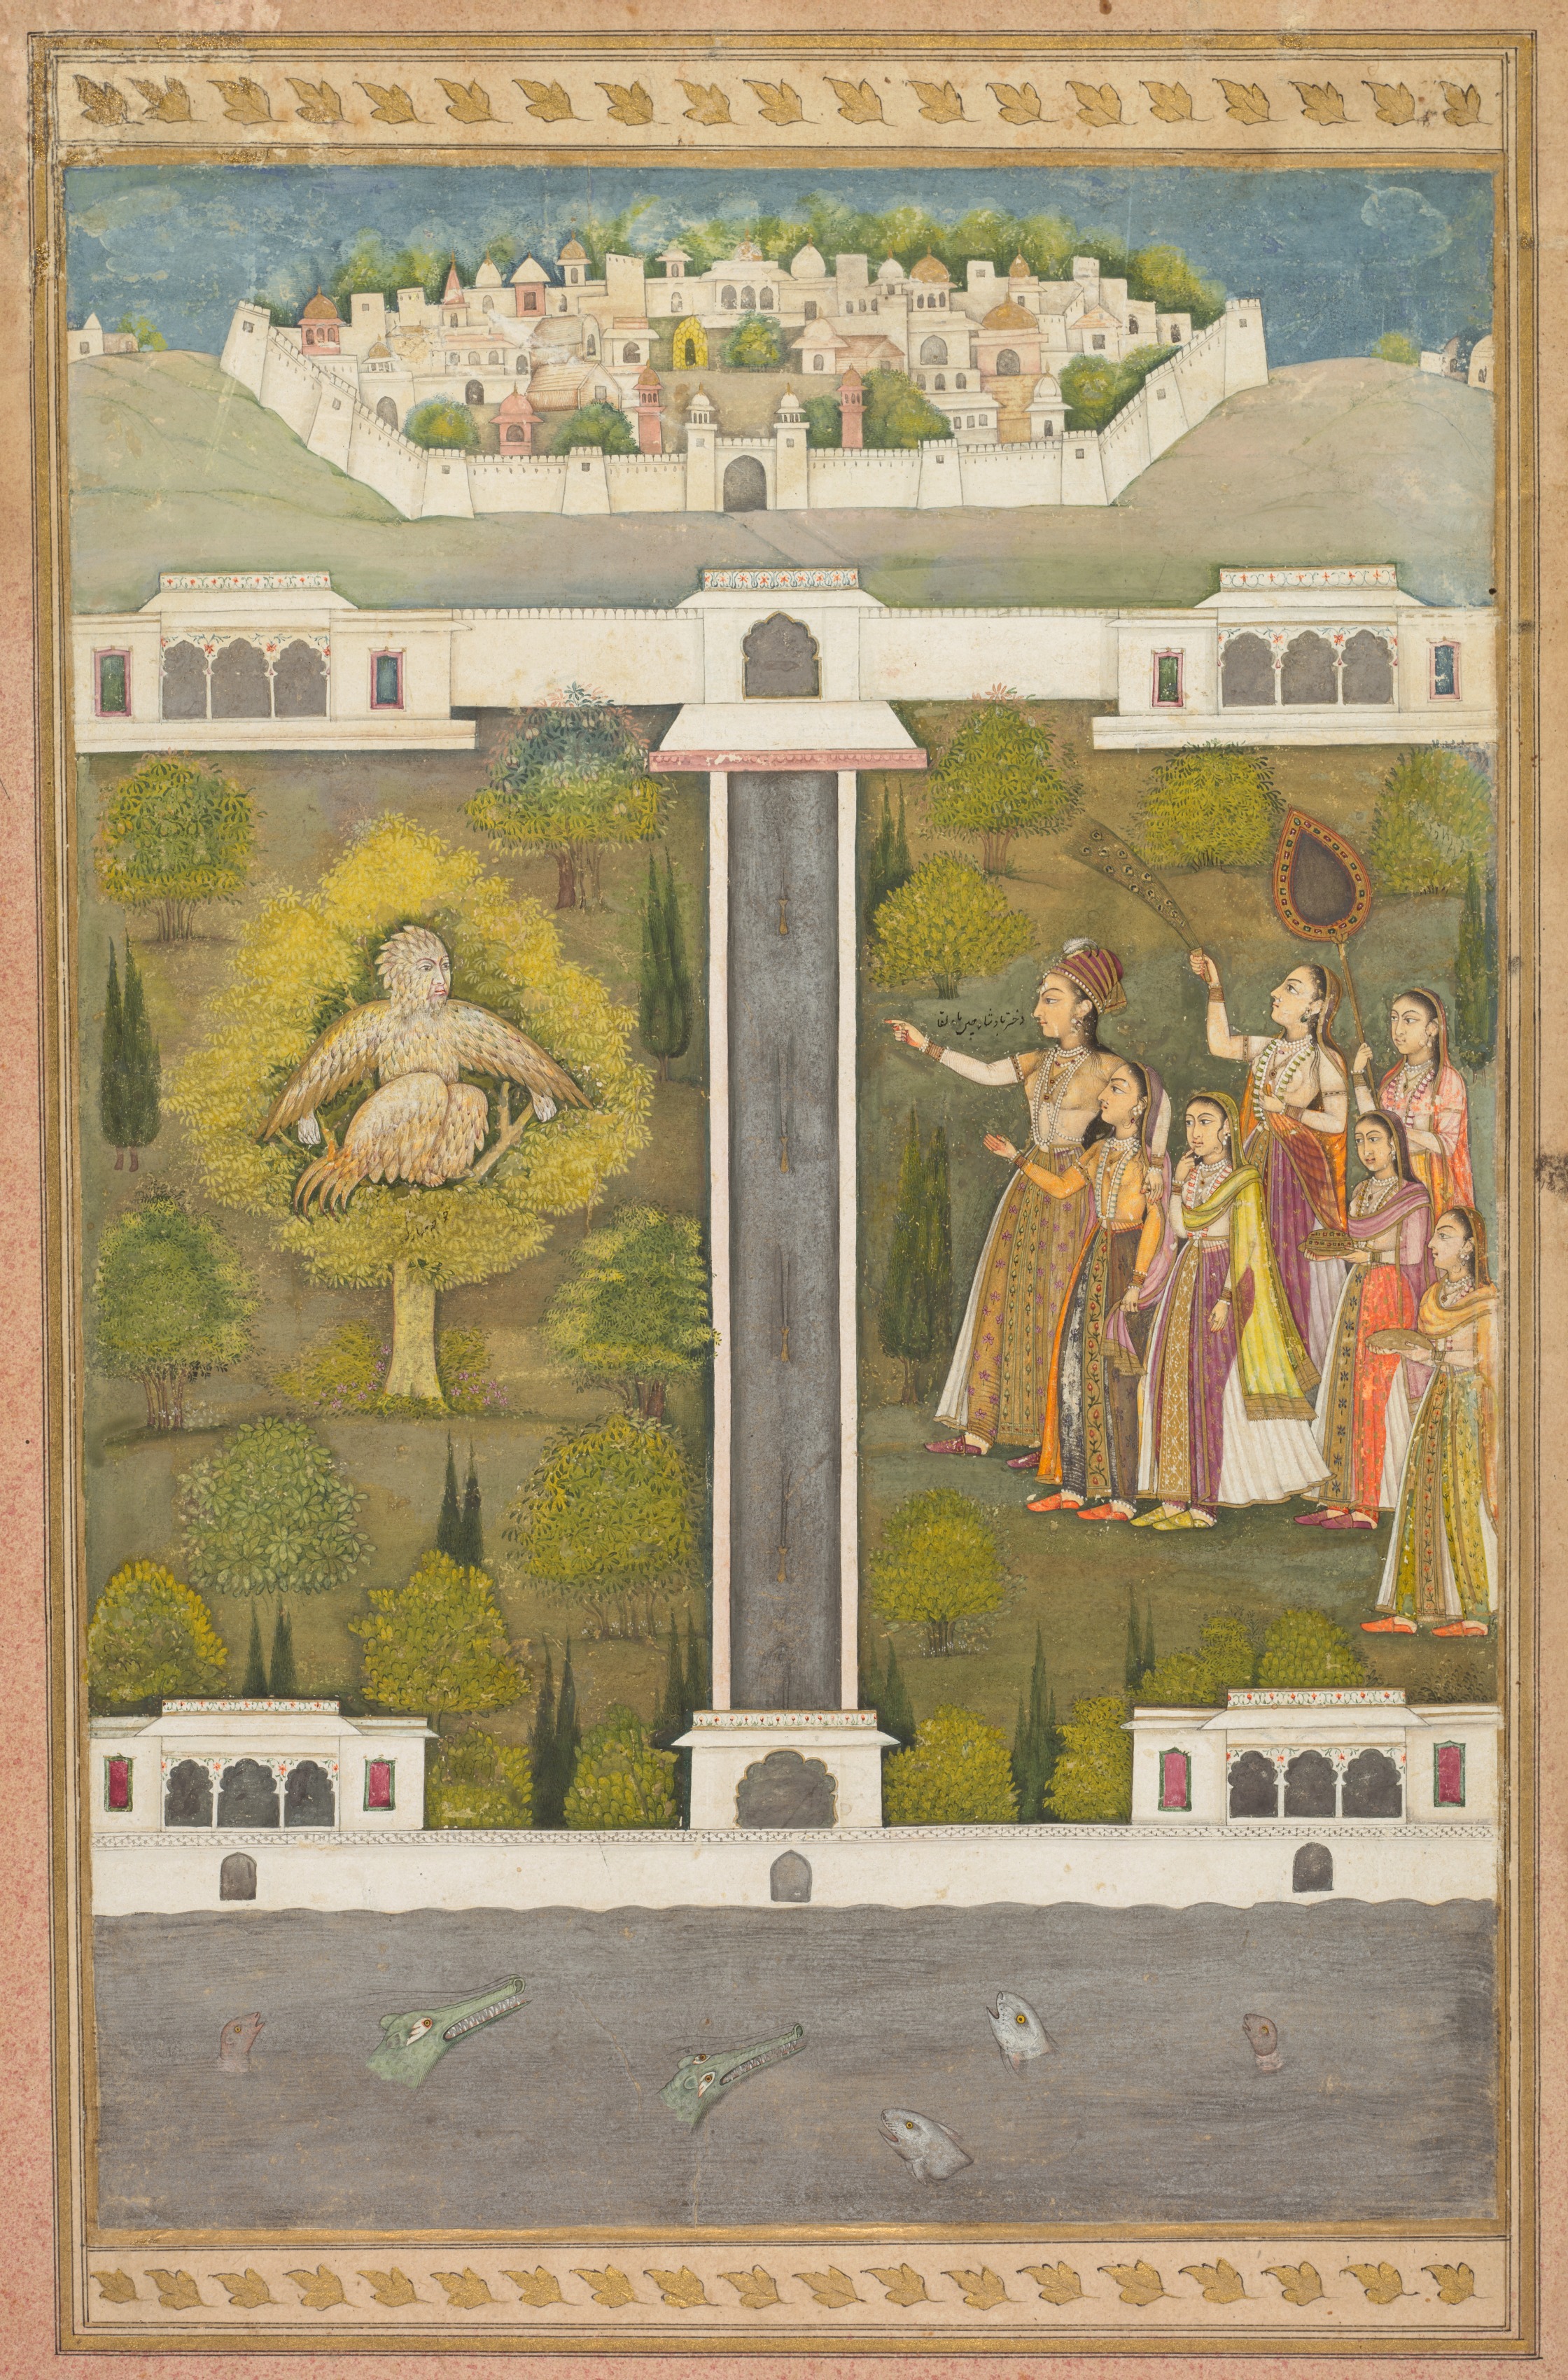 Mahliqa, Daughter of the Emperor of China, Pointing at the Bird-Man Khwaja Mubarak: A Leaf from a Poetical Romance Relating to Shah Alam I (verso); Stenciled Scenes of Lion and Gazelle (verso)